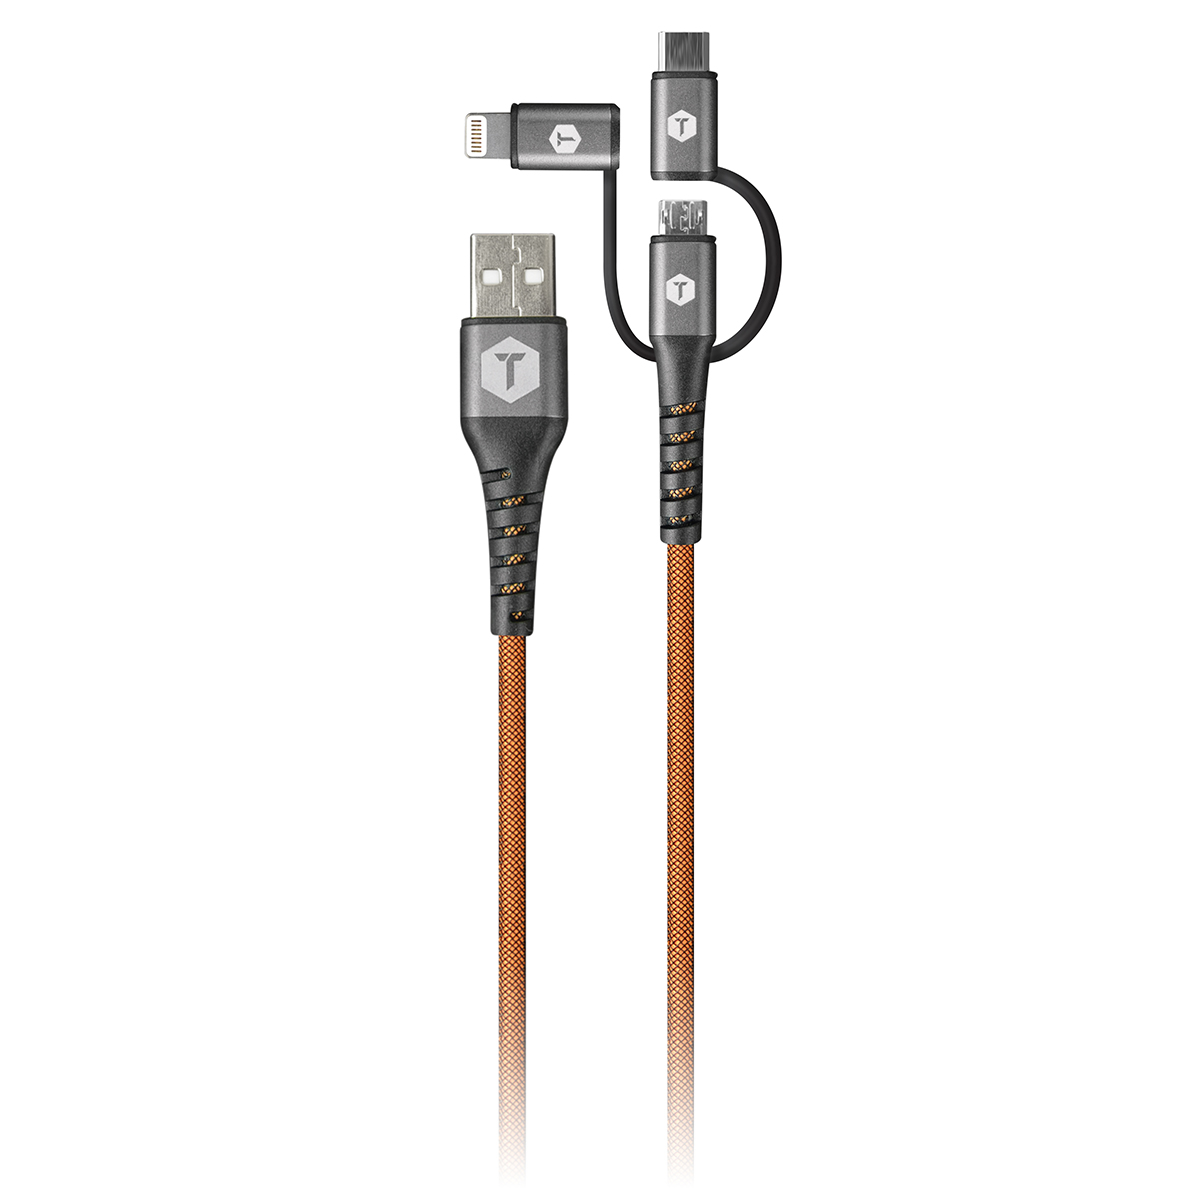 Tough Tested 6FT 3-in-1 Armor-Weave Charging Cable USB-C Micro Lightning Power Cord-Orange